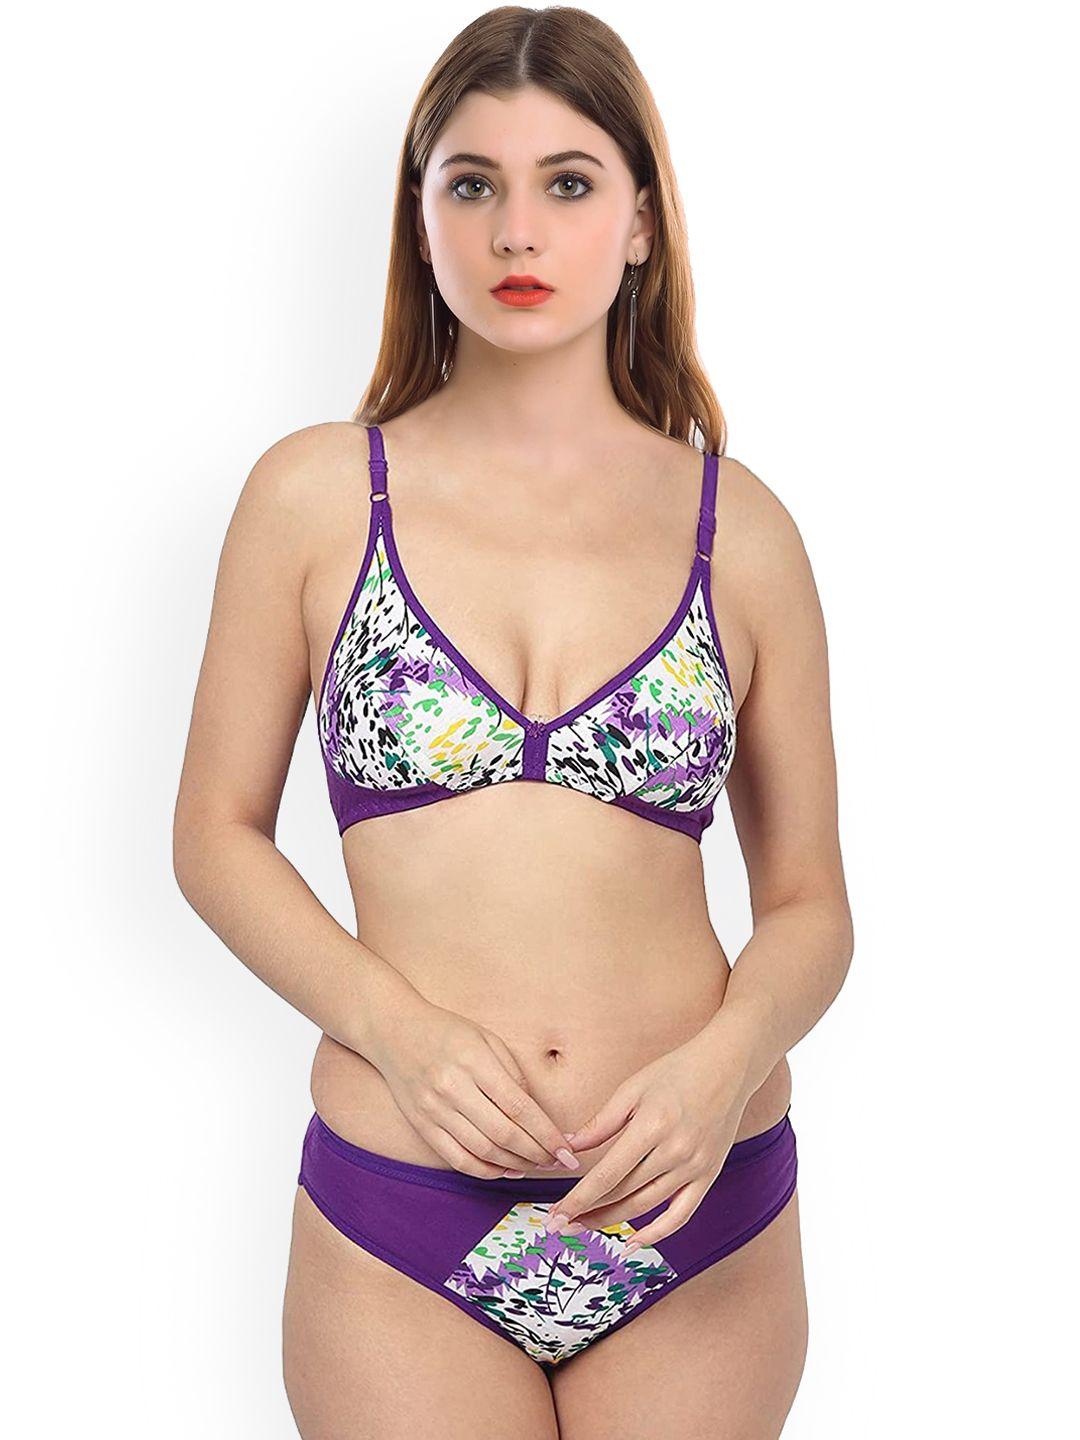 arousy printed cotton lingerie set by_tiger set_purple_40